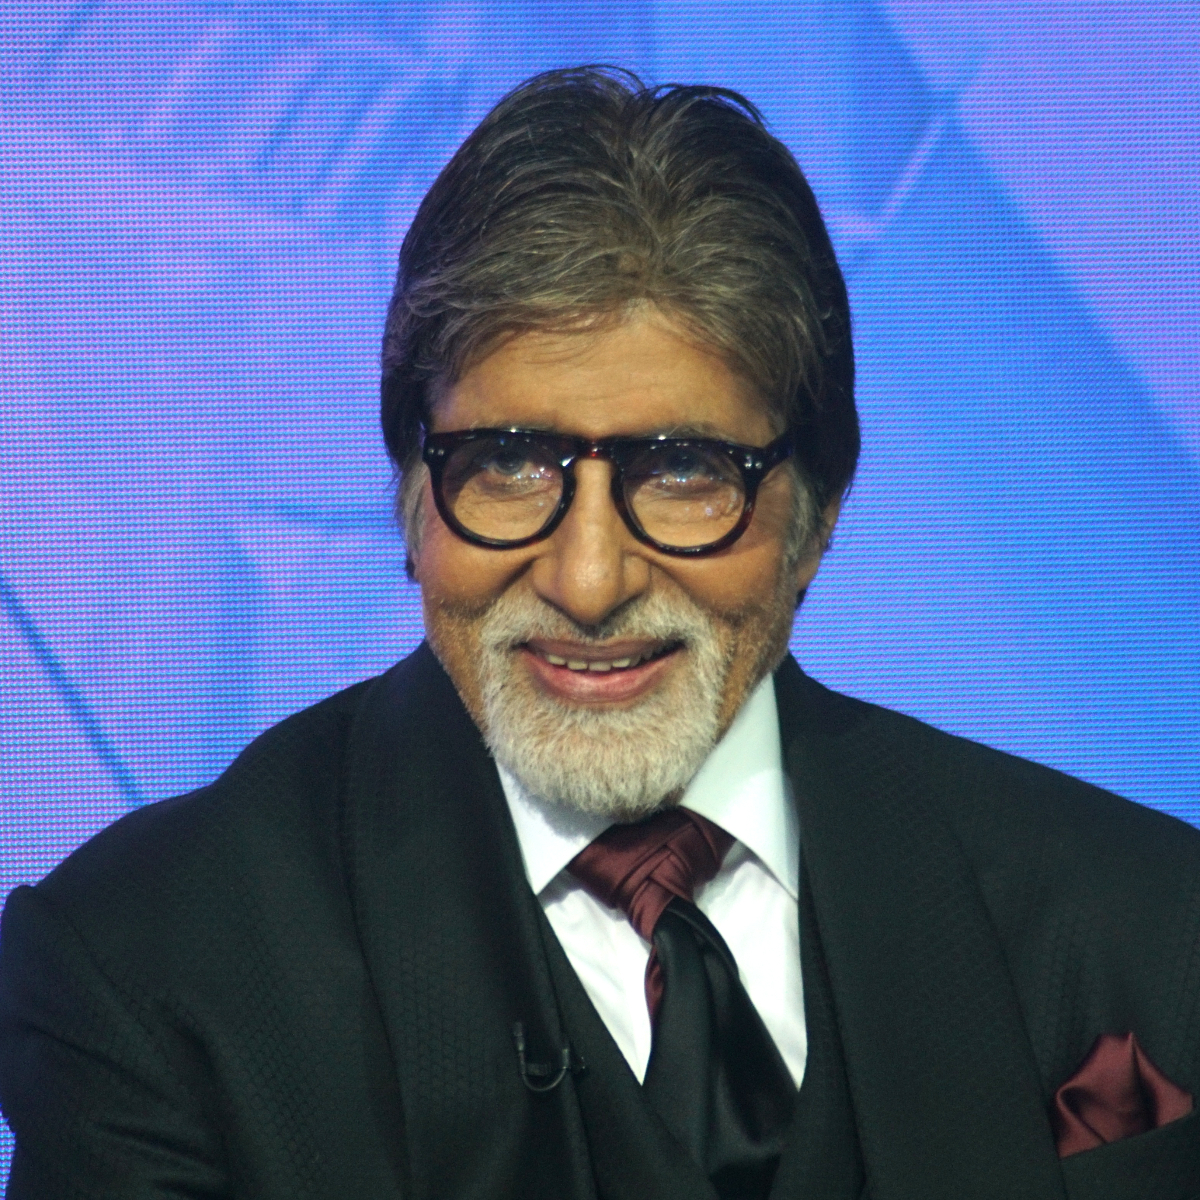 EXCLUSIVE: Amitabh Bachchan is reserved not snooty, says Coolie co-star Rati Agnihotri 